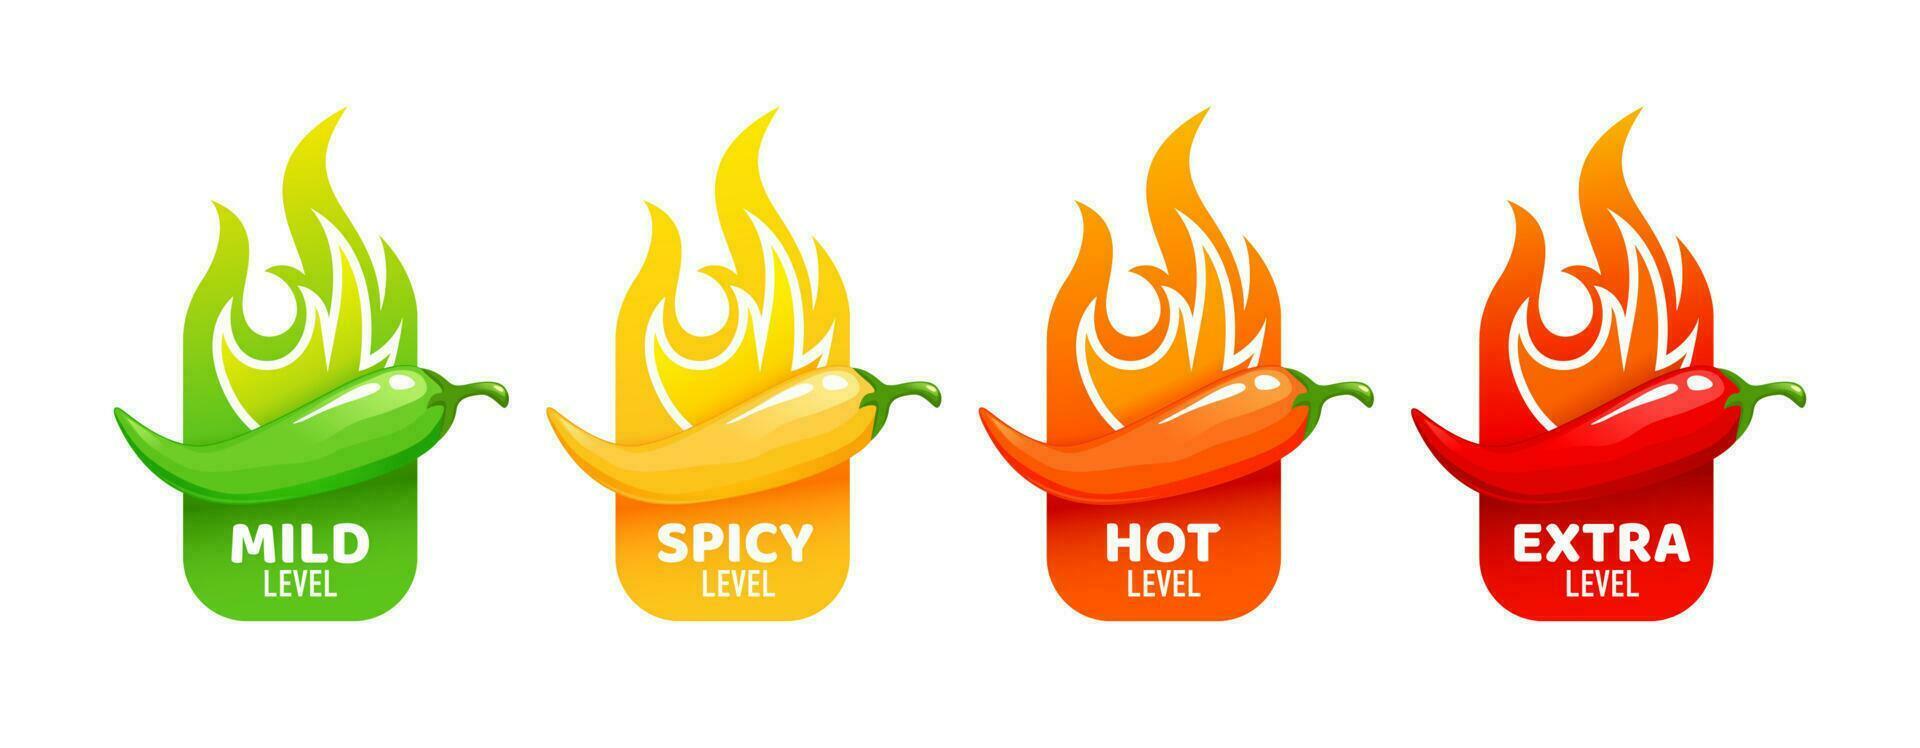 Hot spicy level labels, chili peppers, fire flames vector